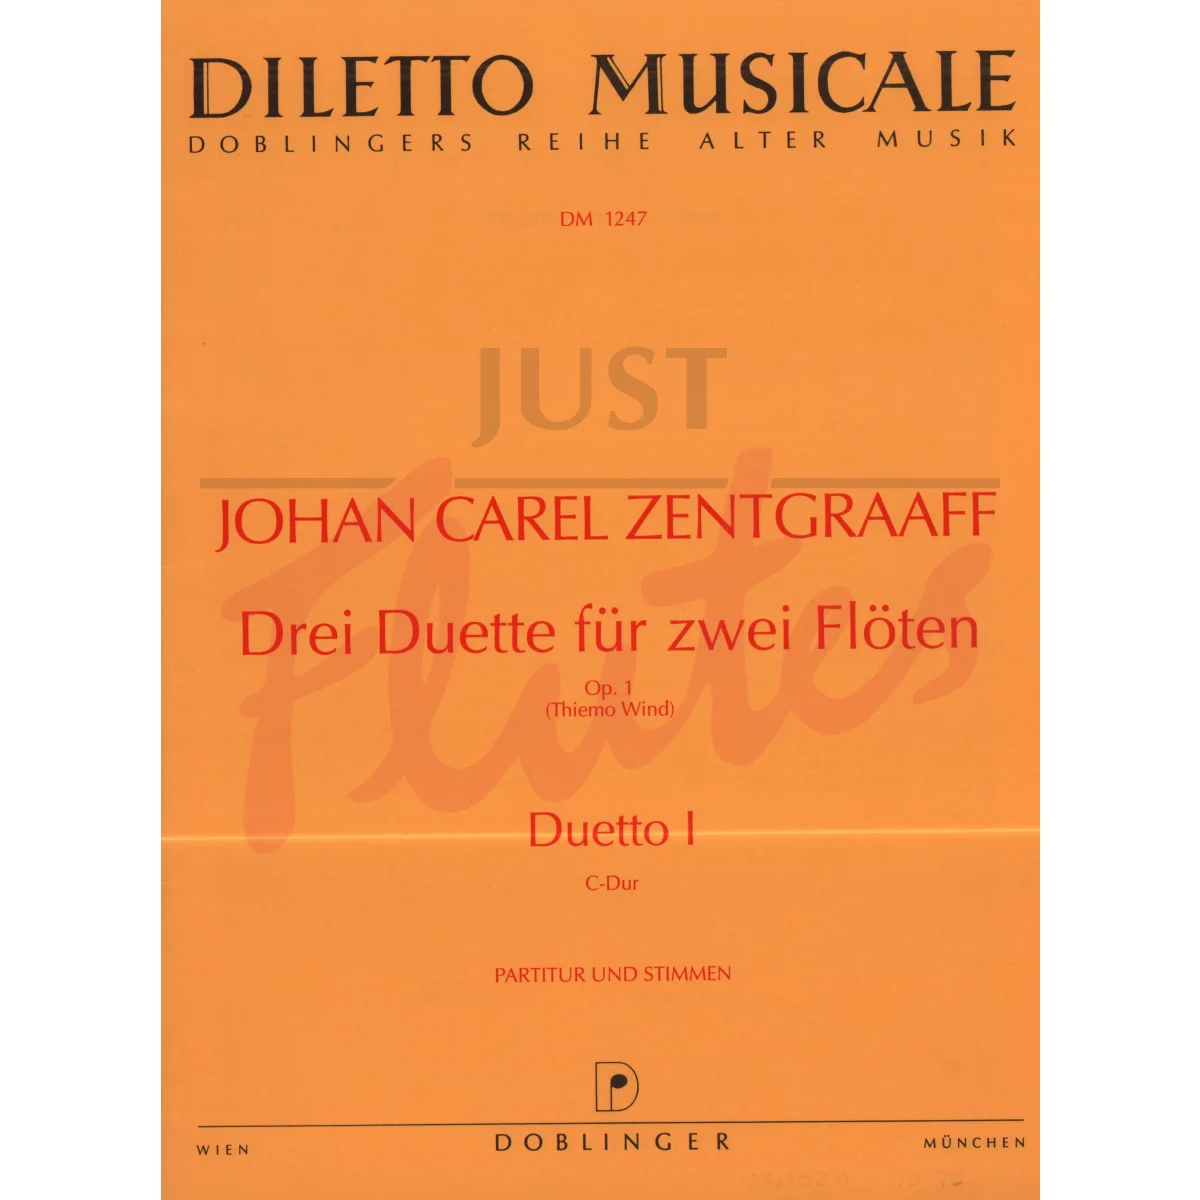 Three Duets for Two Flutes: No. 1 in C major